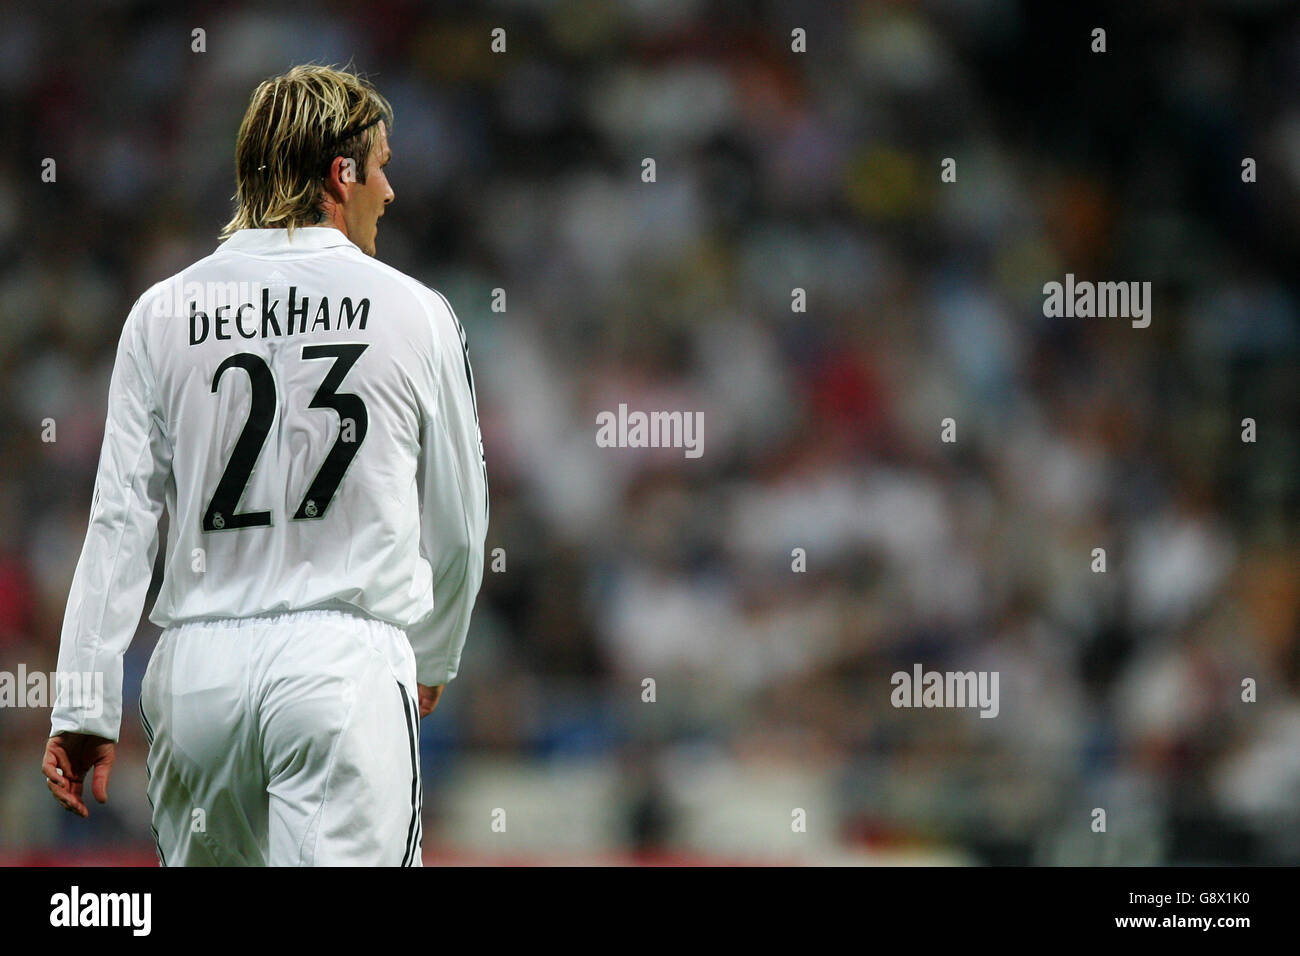 David beckham real madrid 23 hi-res stock photography and images - Alamy